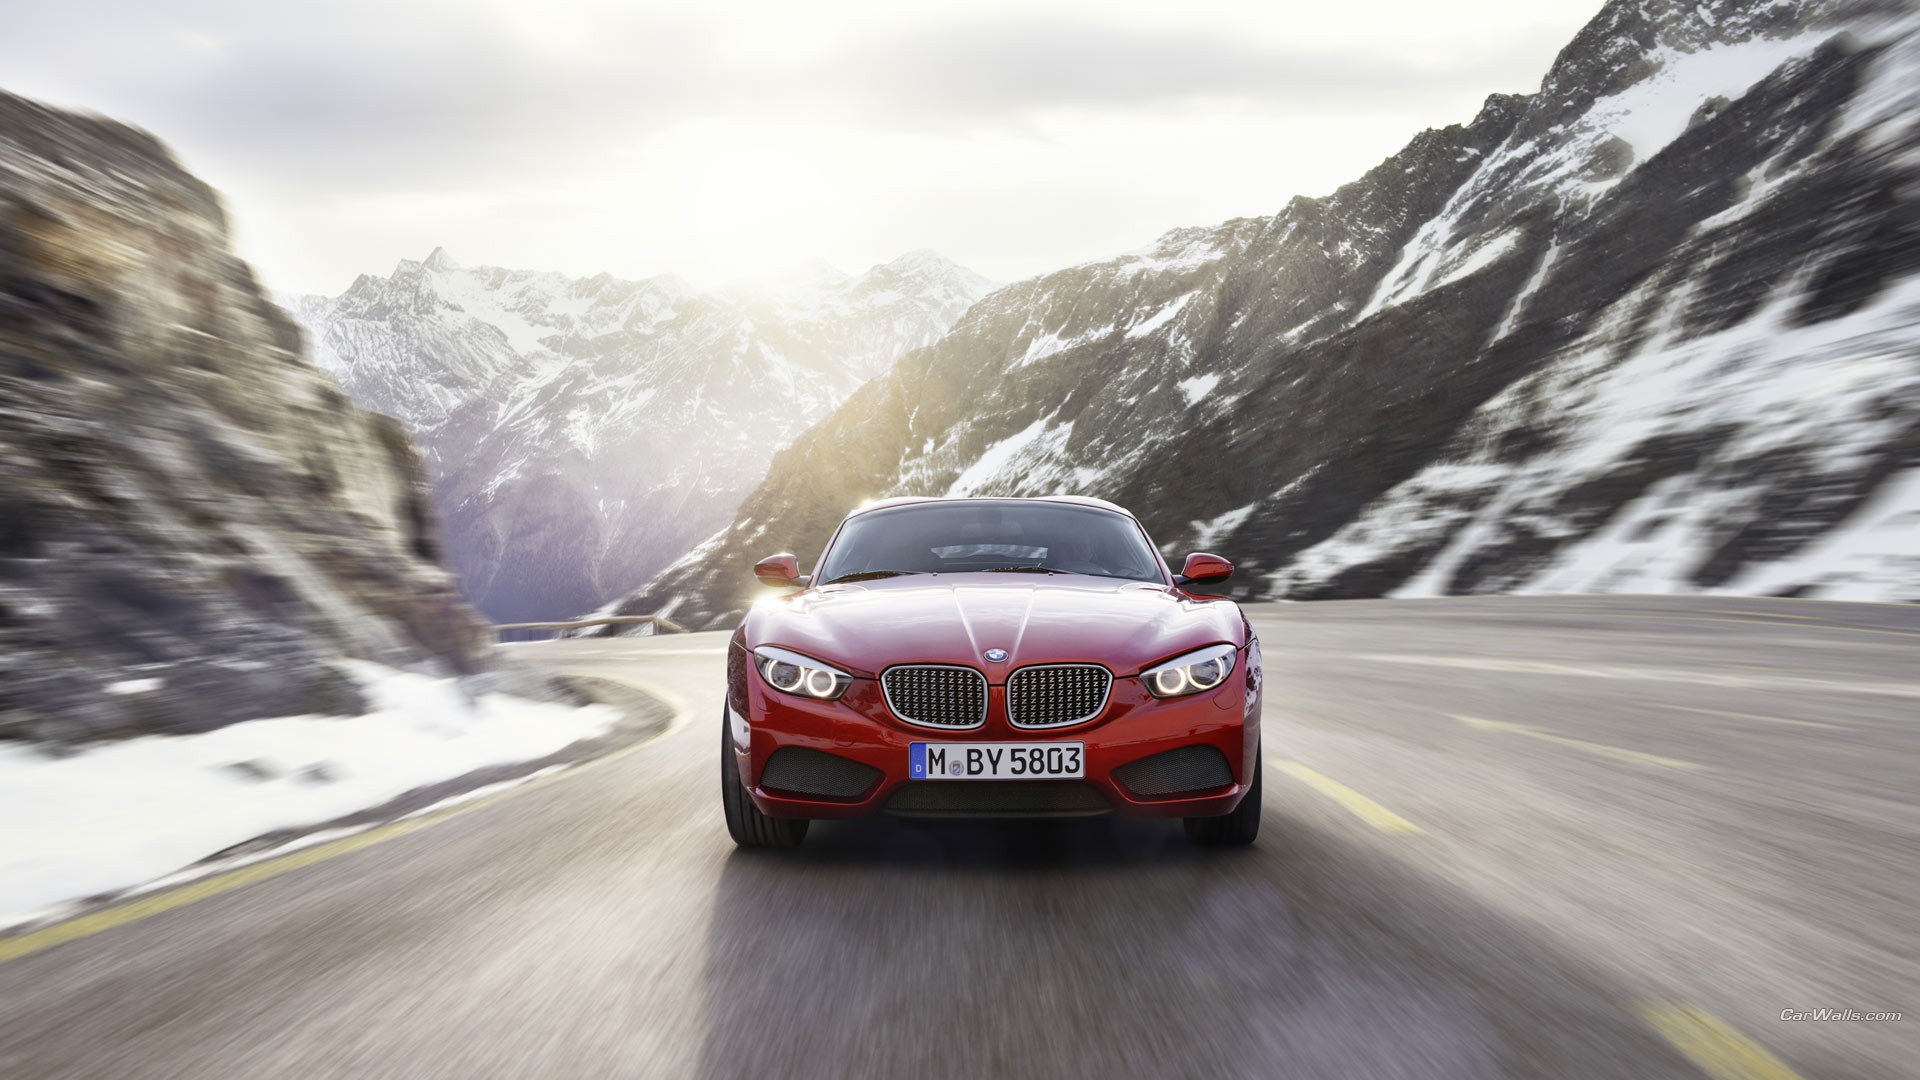 General 1920x1080 car BMW red cars coupe BMW Z4 Zagato vehicle asphalt mountains German cars frontal view licence plates road snow sunlight snow covered motion blur headlights watermarked